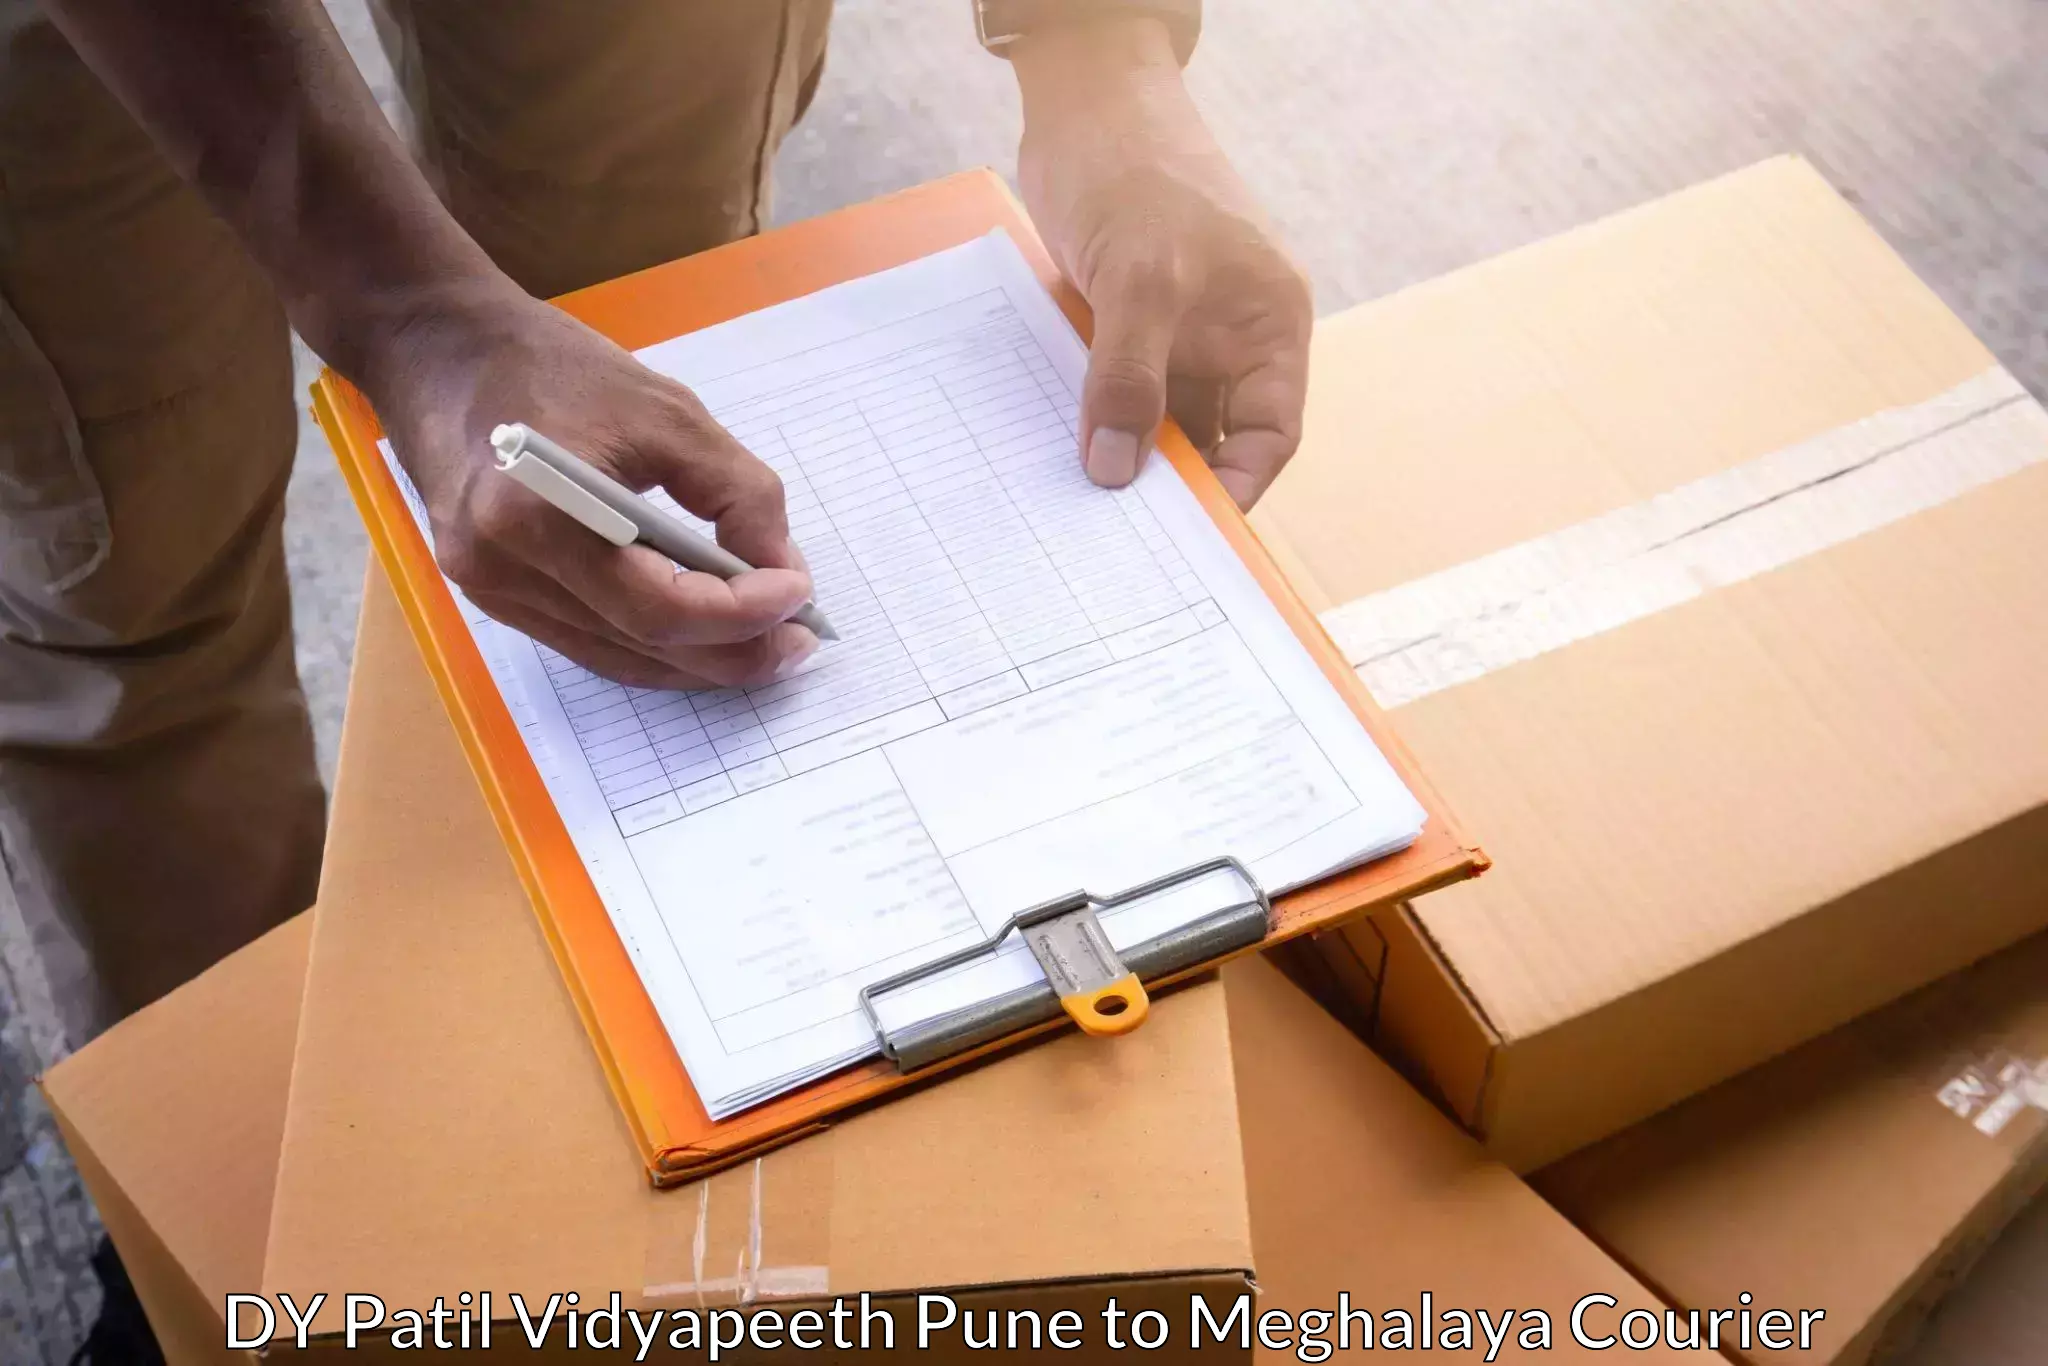 Speedy delivery service DY Patil Vidyapeeth Pune to Umsaw